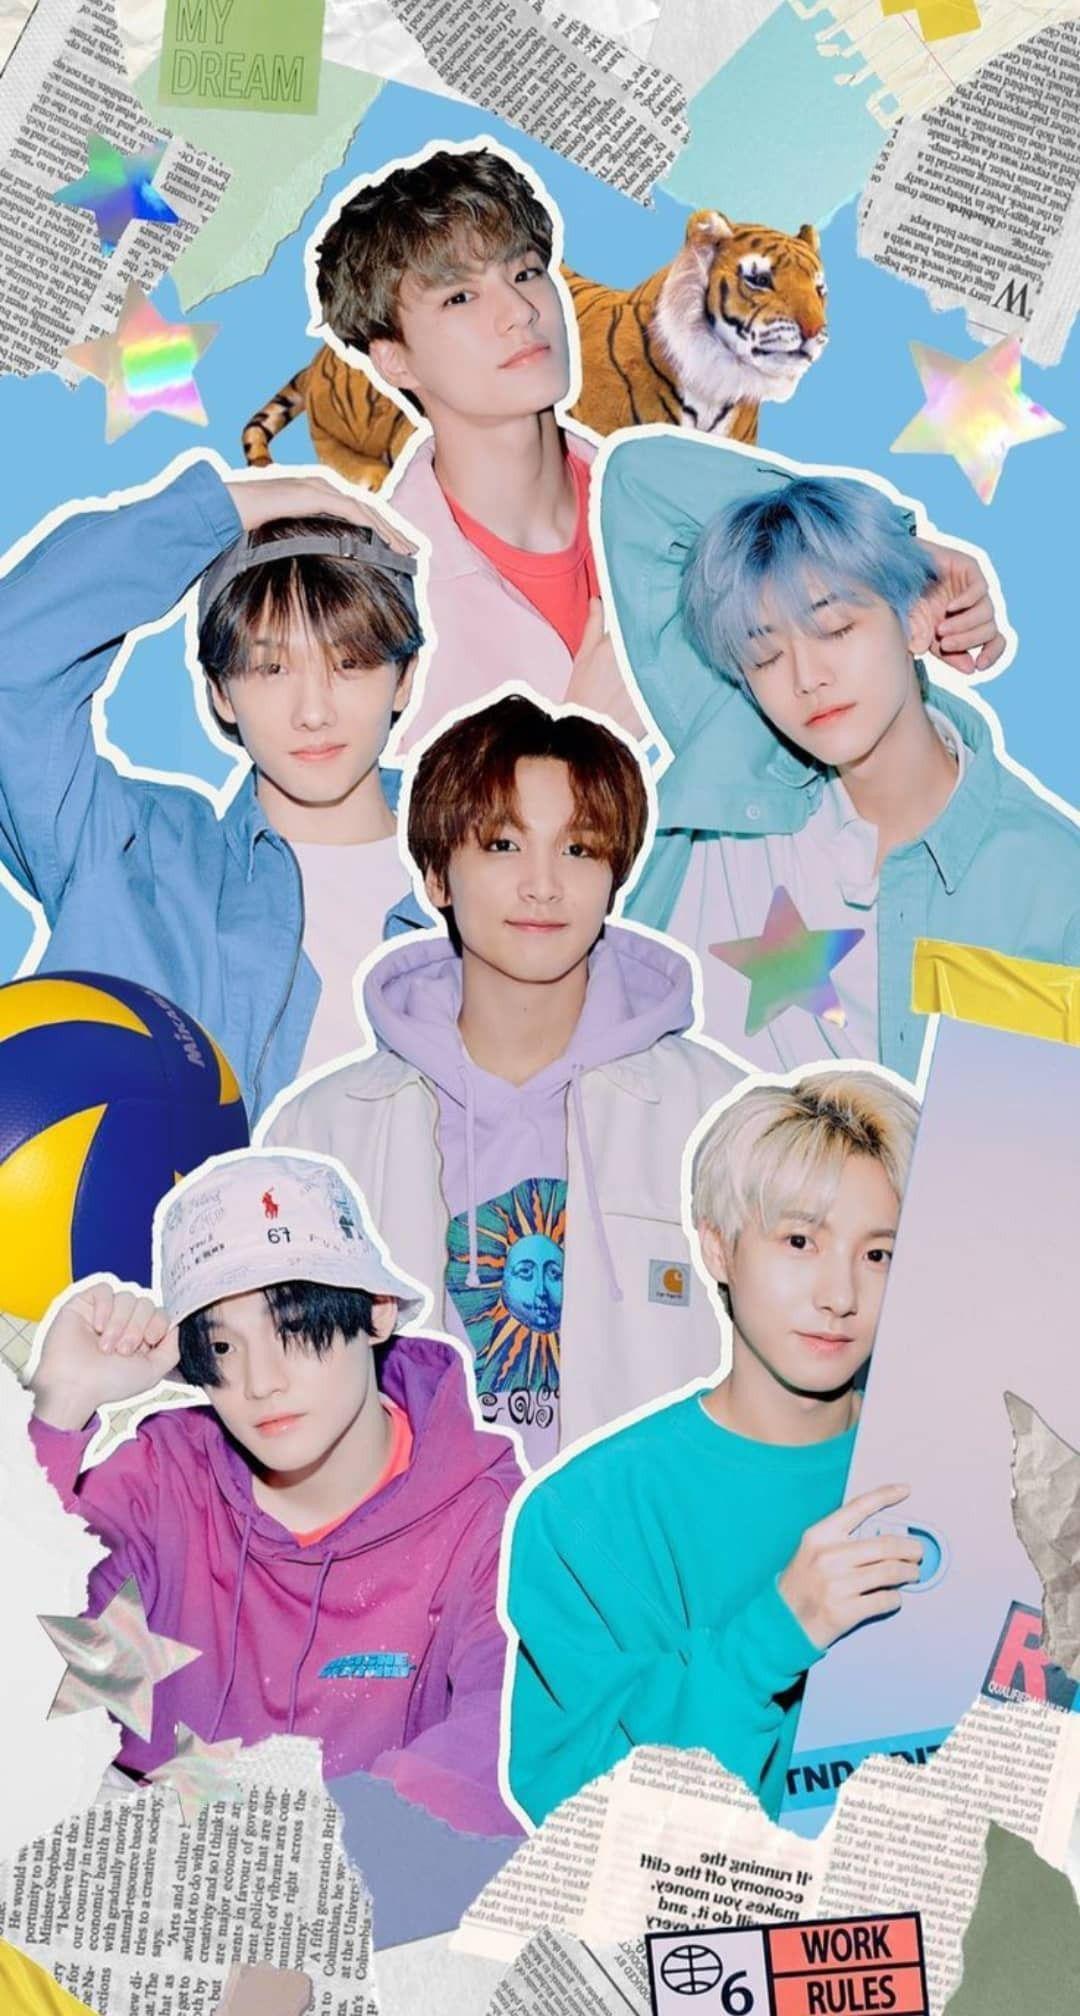 Great Nct Dream Aesthetic Wallpaper Laptop Hd Archives of all time Don